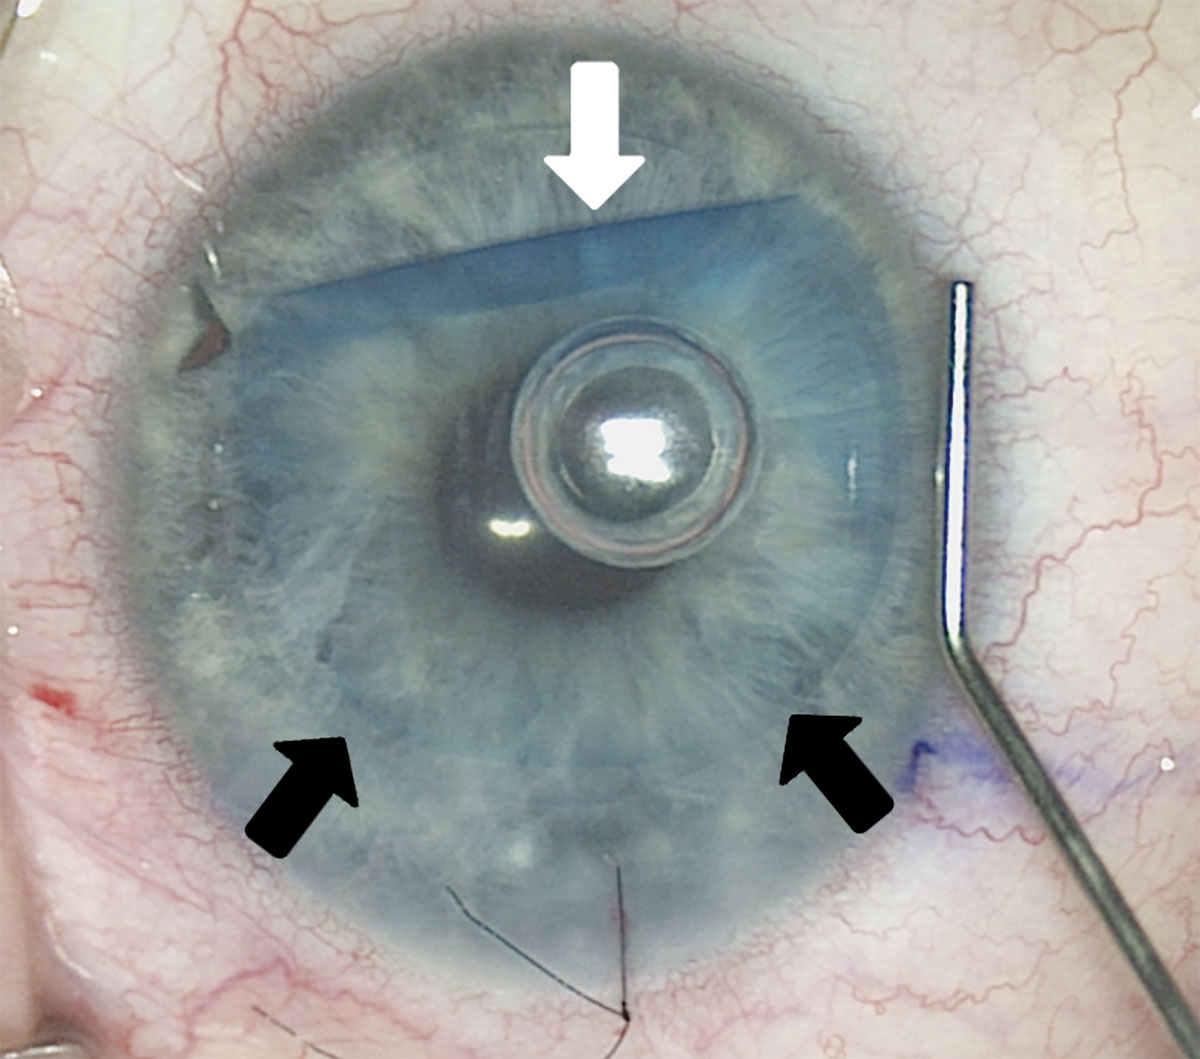 Fig. 3. This intraoperative image shows placement of DMEK donor tissue in a recipient eye. The DMEK tissue, which is approximately 20µm thick, was stained with trypan to facilitate visualization. The tissue was folded for insertion through a 2.2mm incision, and is being uncurled inside the eye using tapping maneuvers on the surface of the host cornea. A small air bubble was injected beneath the DMEK tissue to help it stay uncurled and pressed against the host cornea. The black arrows show the thin edge of the graft where it is fully uncurled and the white arrow shows an edge that is still curled.